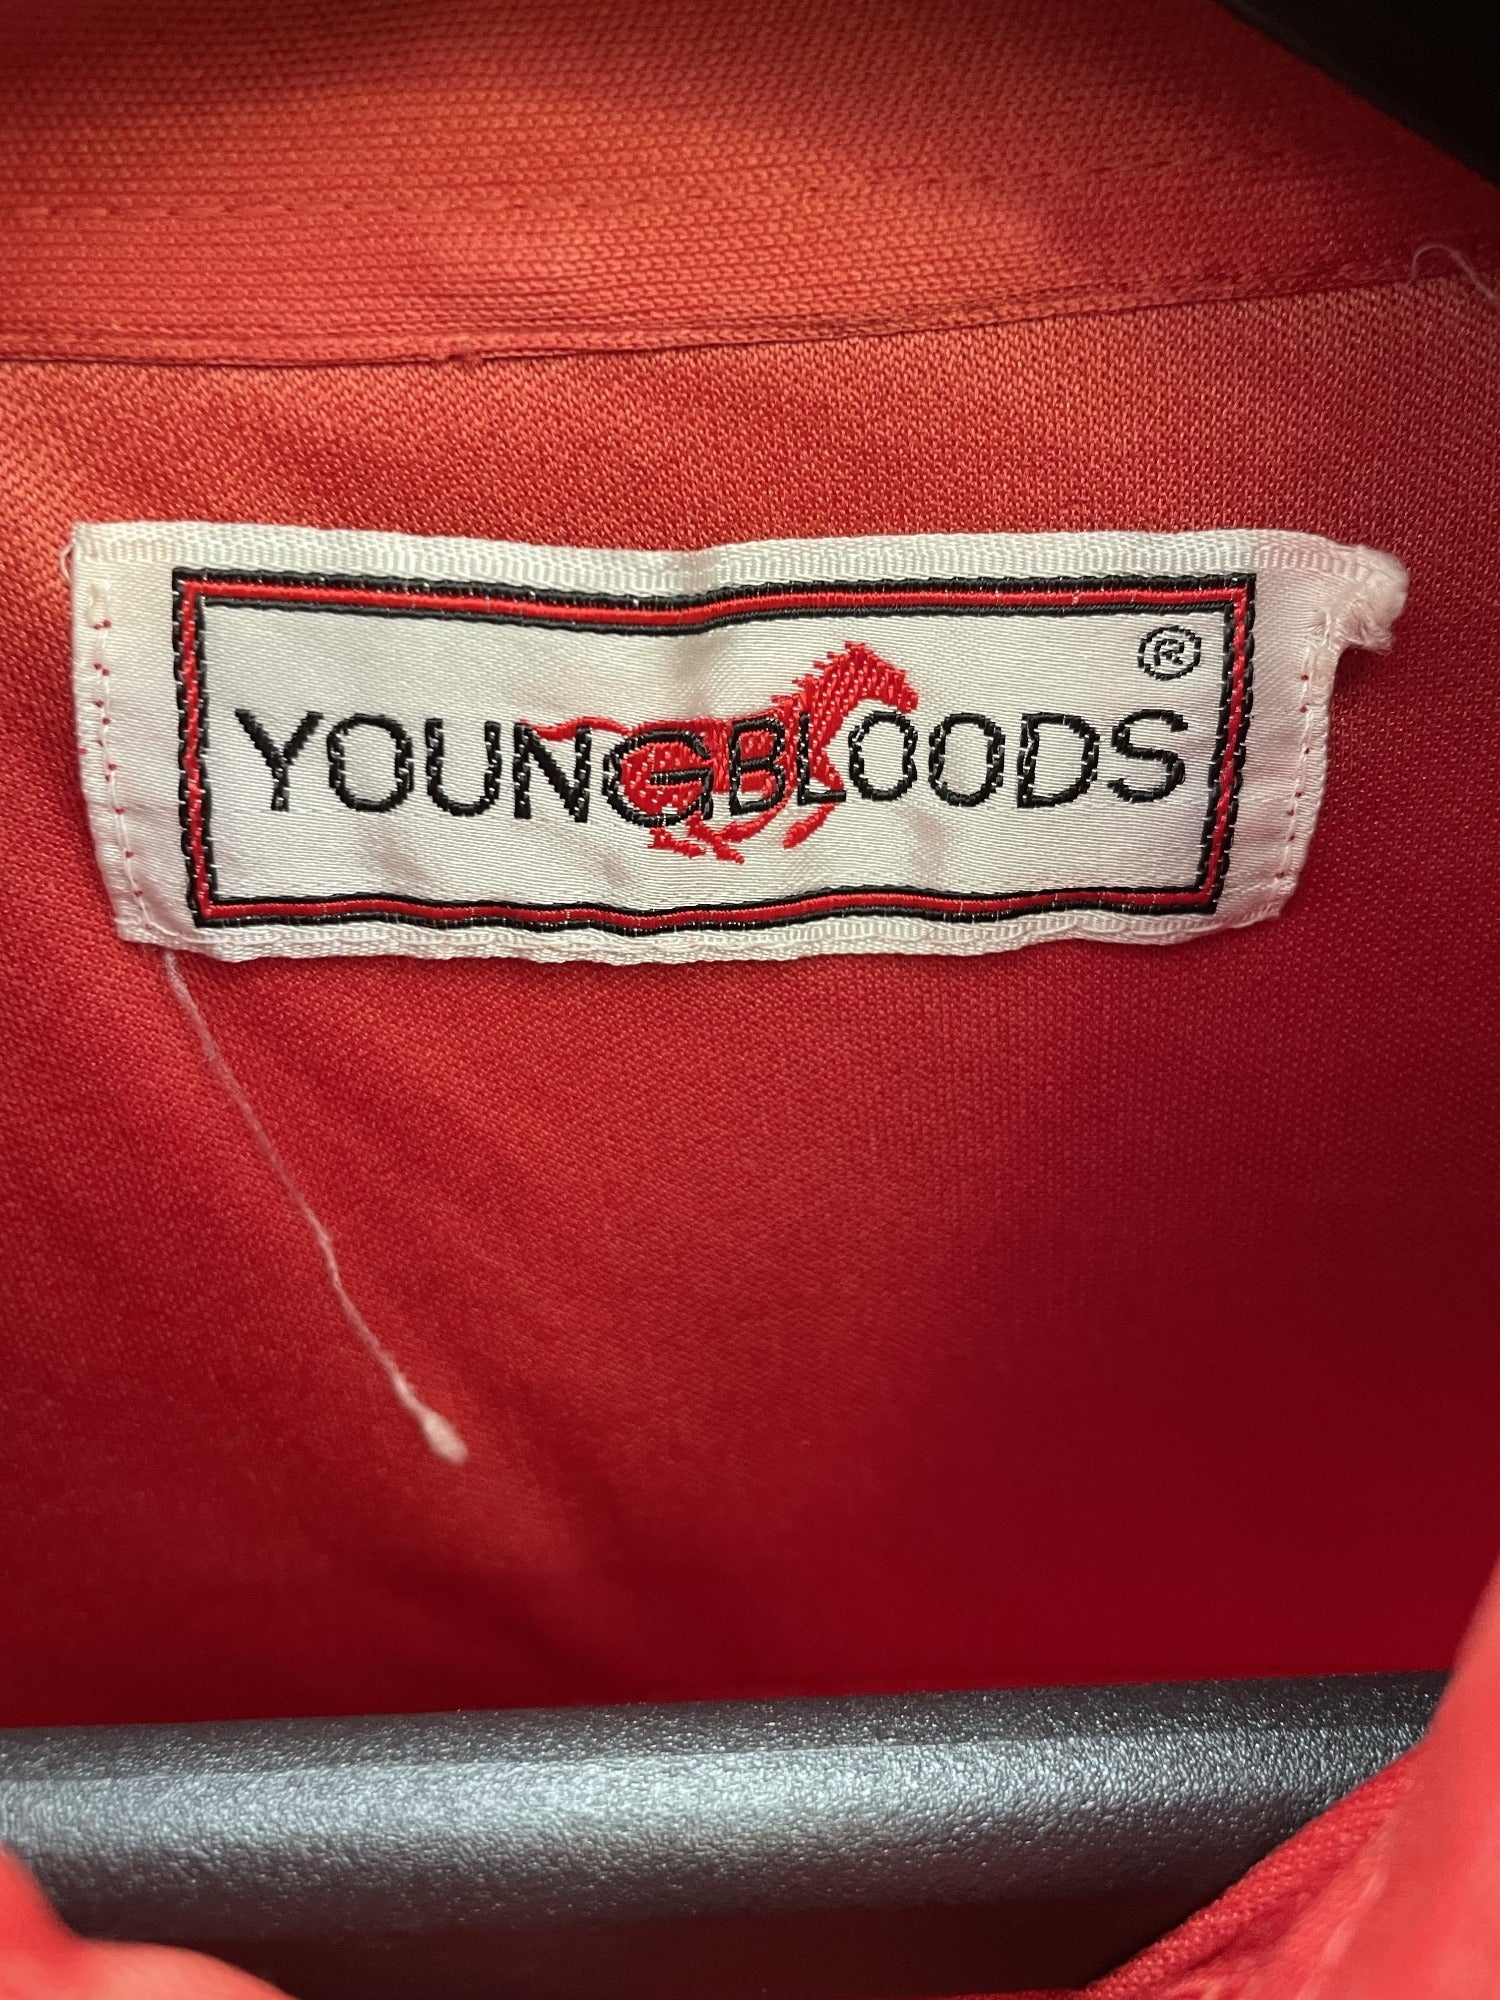 young bloods  vintage  Urban Village Vintage  urban village  stretch fabric  Red  pockets  Mens Shirts  mens  M  long sleeve  lined  disco  dagger collar  collared  collar  button down  button  big collar  70s  1970s